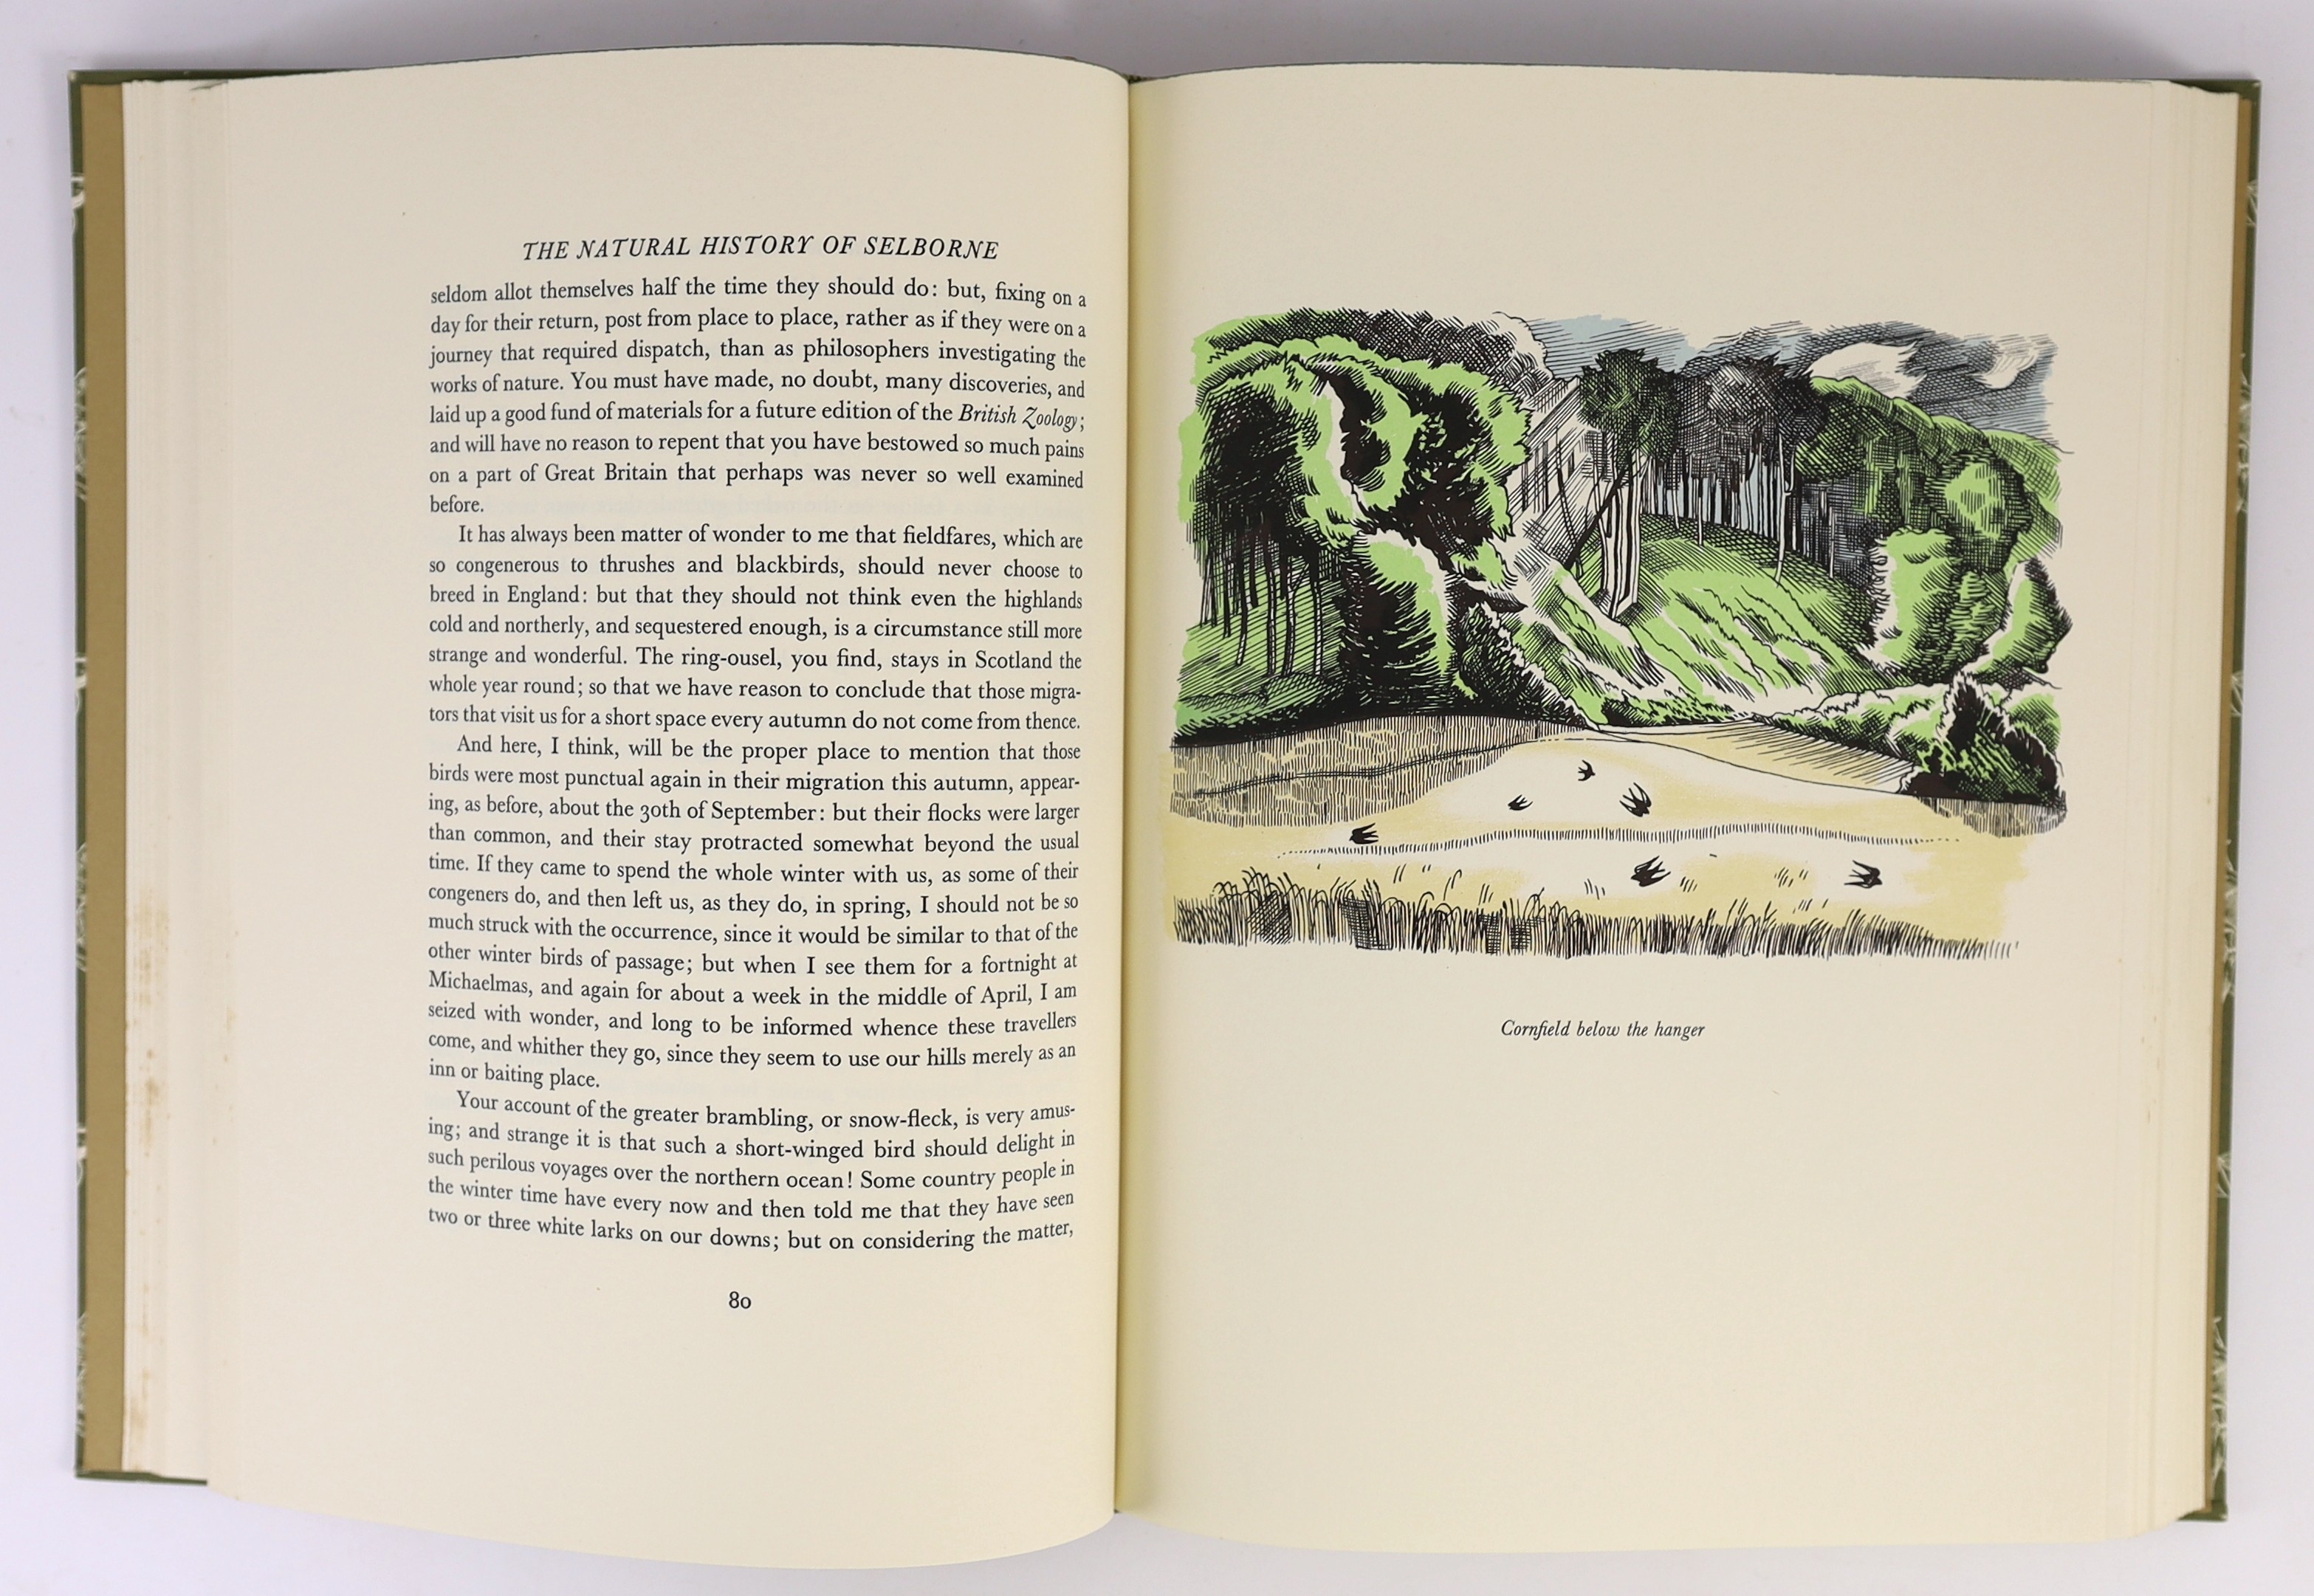 White, Gilbert - The Natural History of Selborne. Limited edition, one of 1500. Signed by John Nash. Complete with 16 coloured plates and 15 text illustrations. Quarter calf and patterned paper with gilt letters on spine